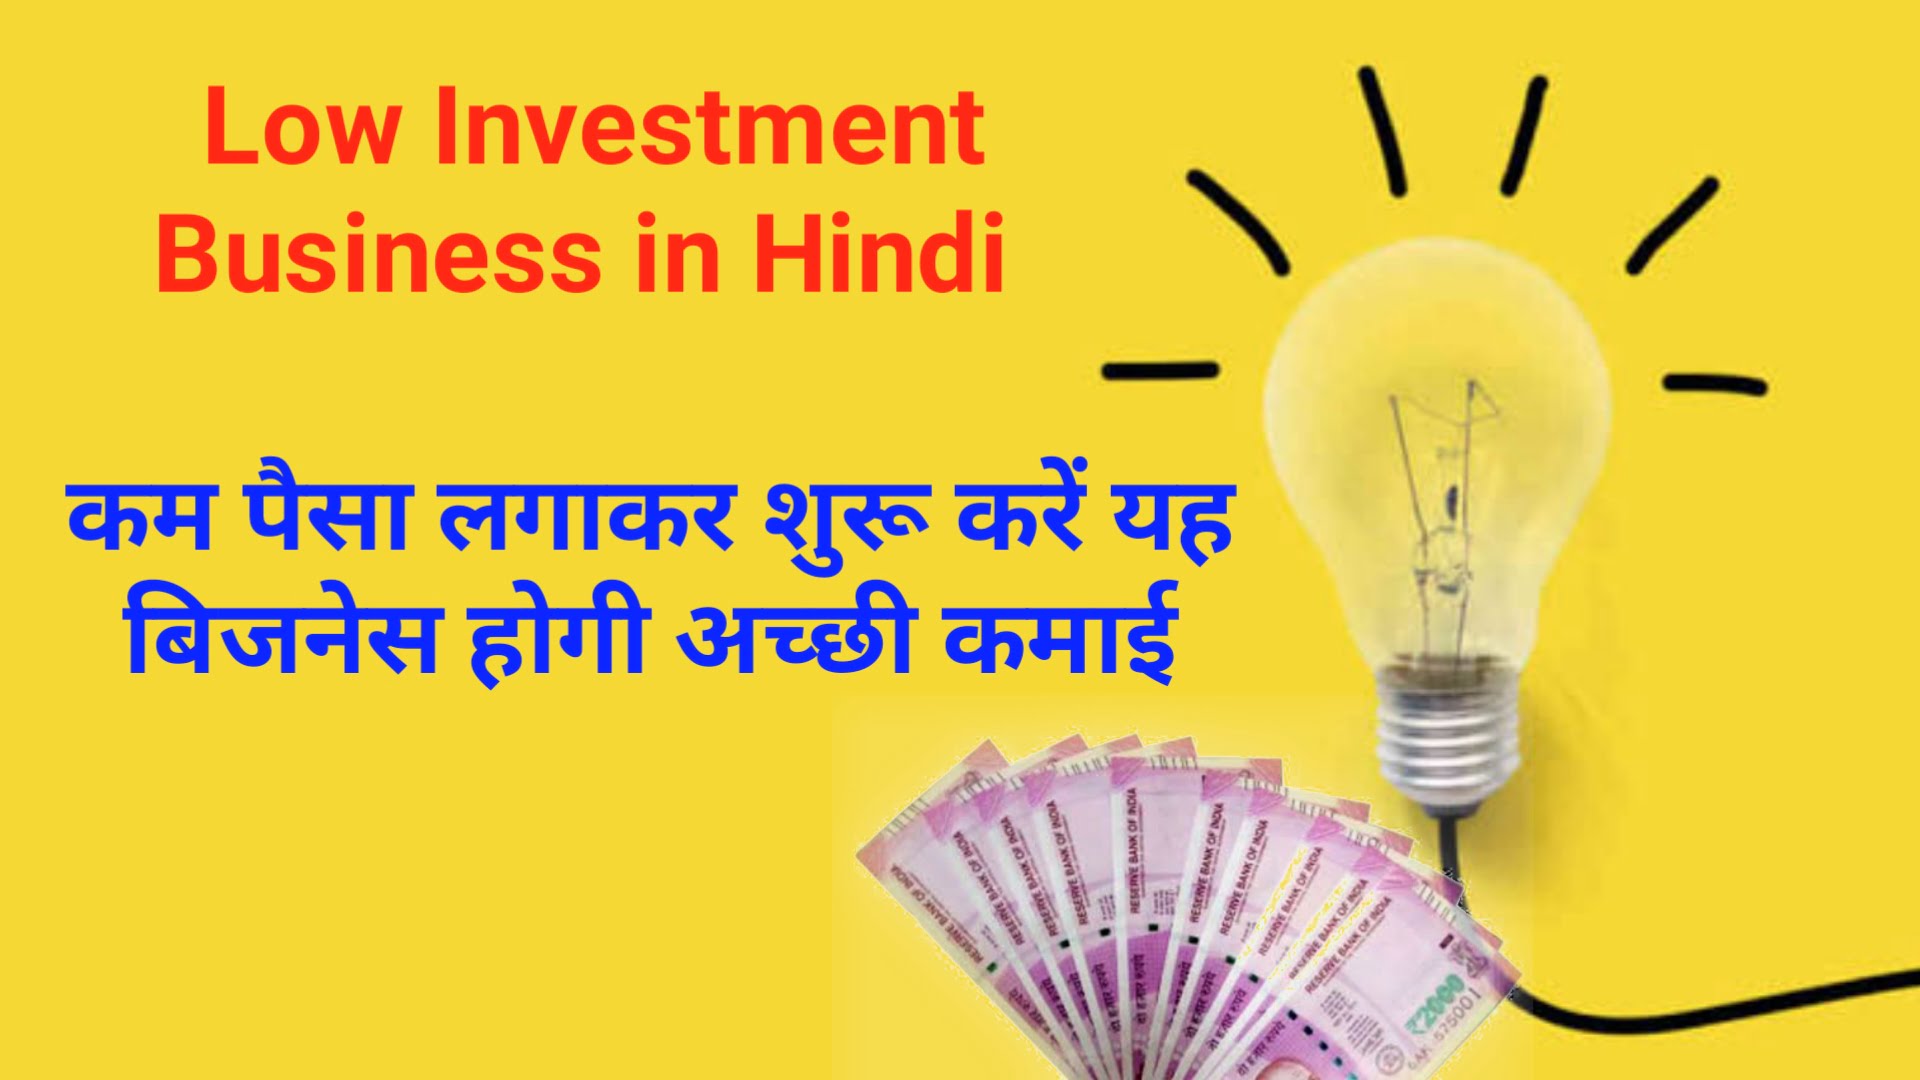 Low Investment Business in Hindi